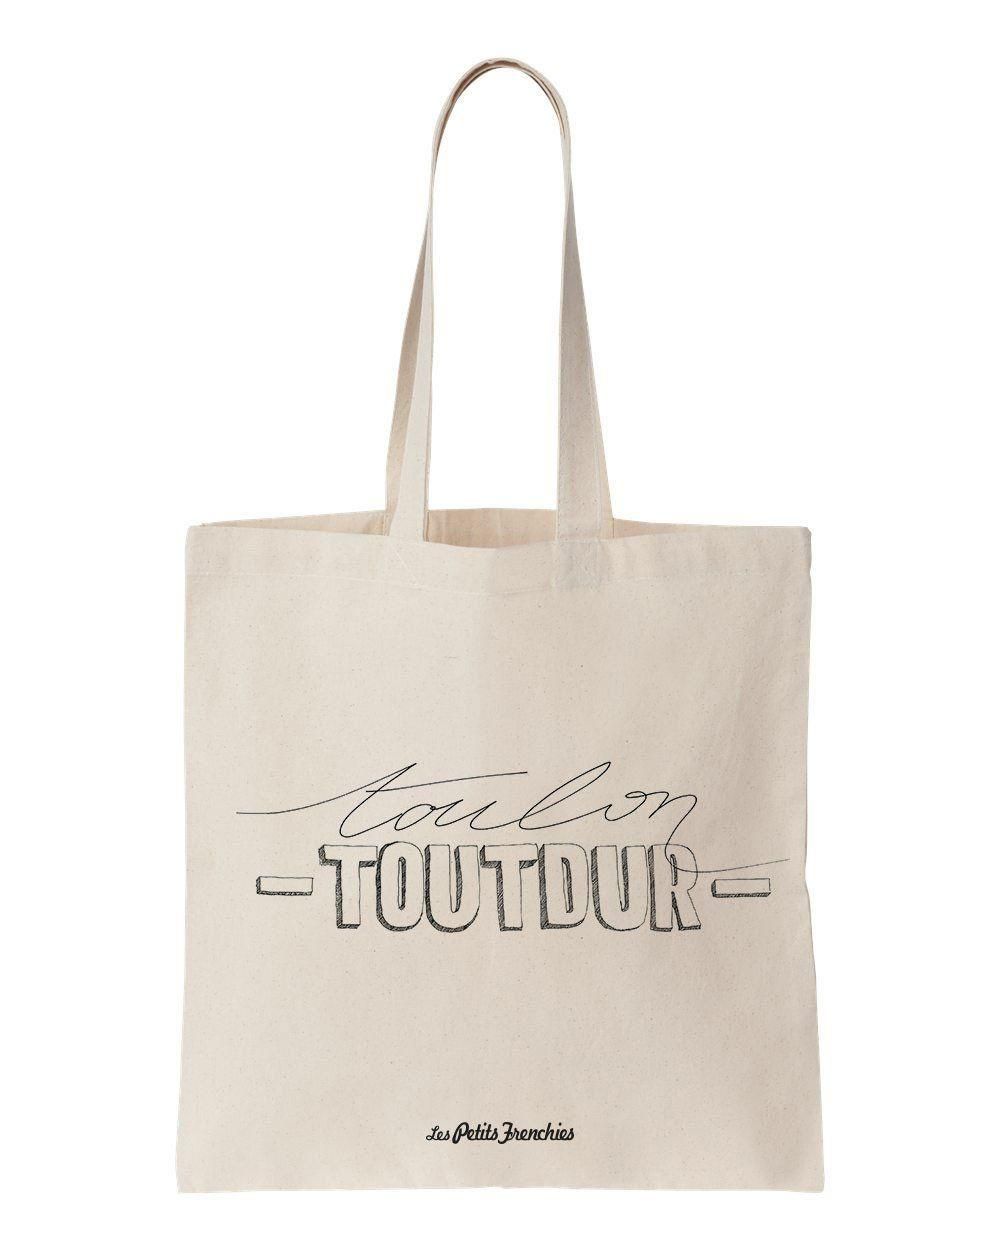 Toulon Tout Dur Printed Tote Bag Gift For Travel Lovers